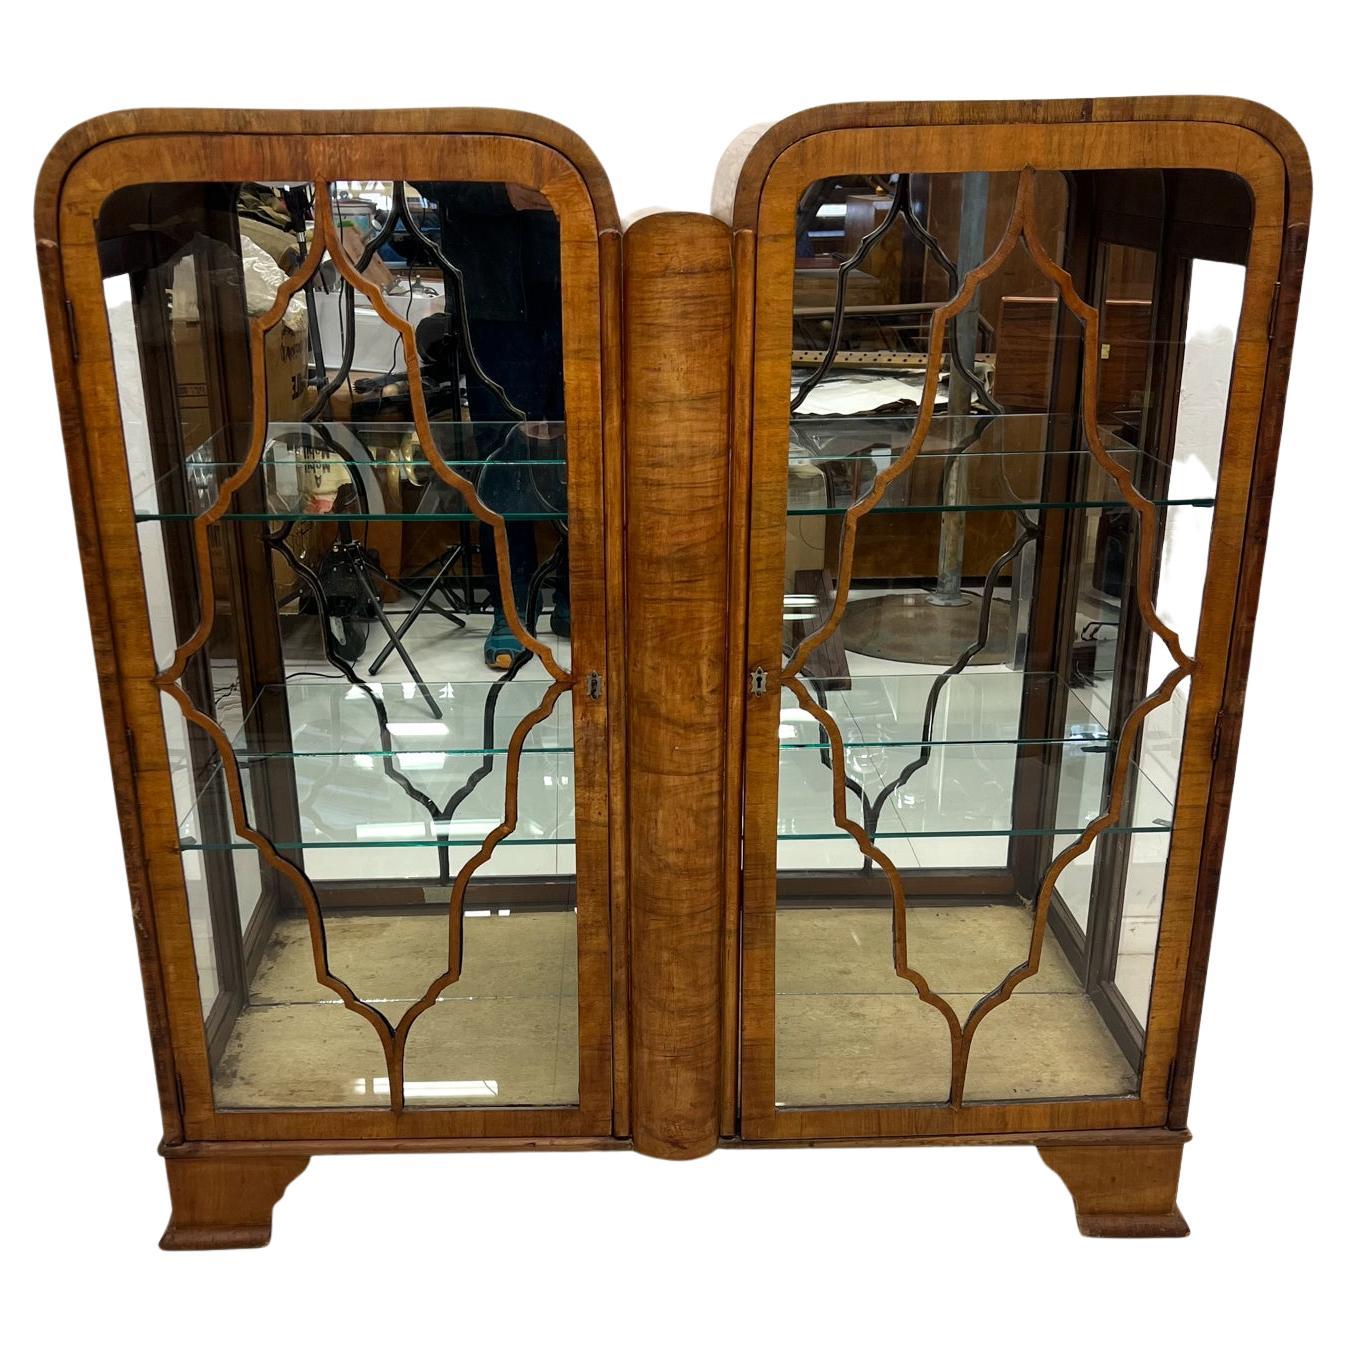 1930s Art Deco Vitrine Display Cabinet Sculptural Exotic Wood Glass Shelving For Sale